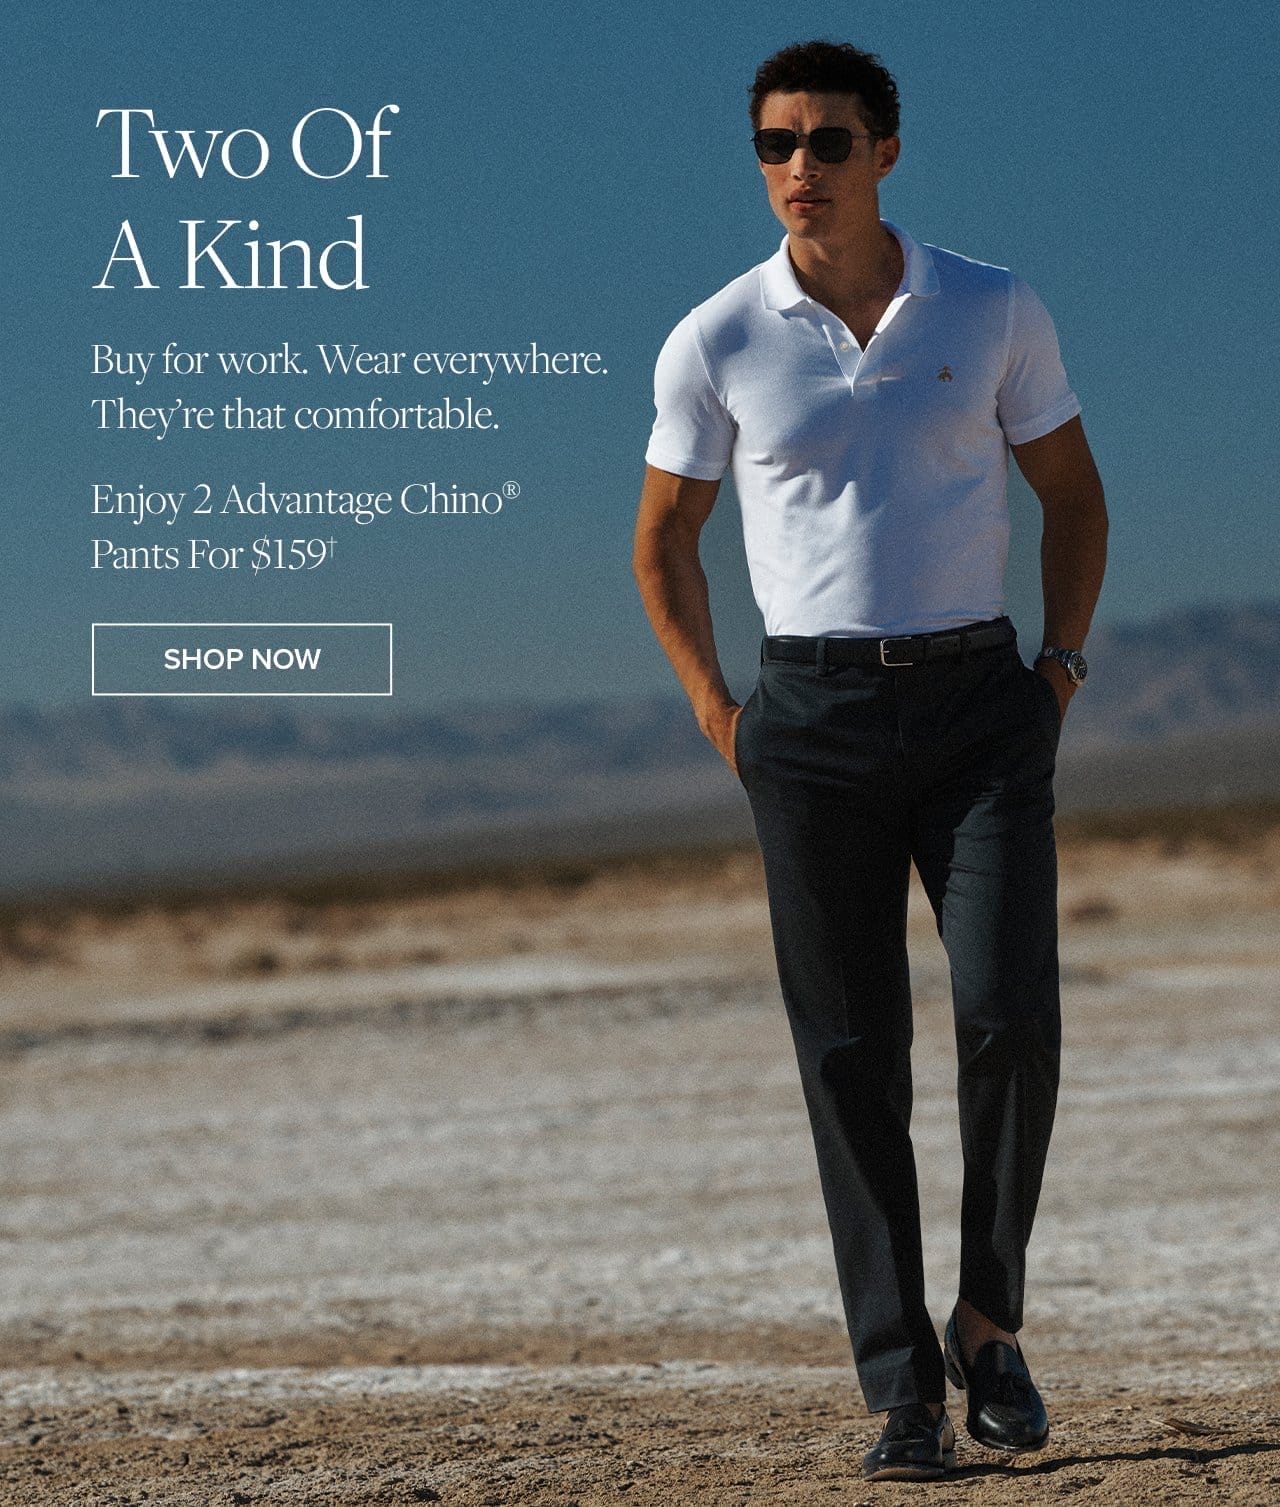 Two Of A Kind Buy for work. Wear everywhere. They're that comfortable. Enjoy 2 Advantage Chino Pants For \\$159 Shop Now